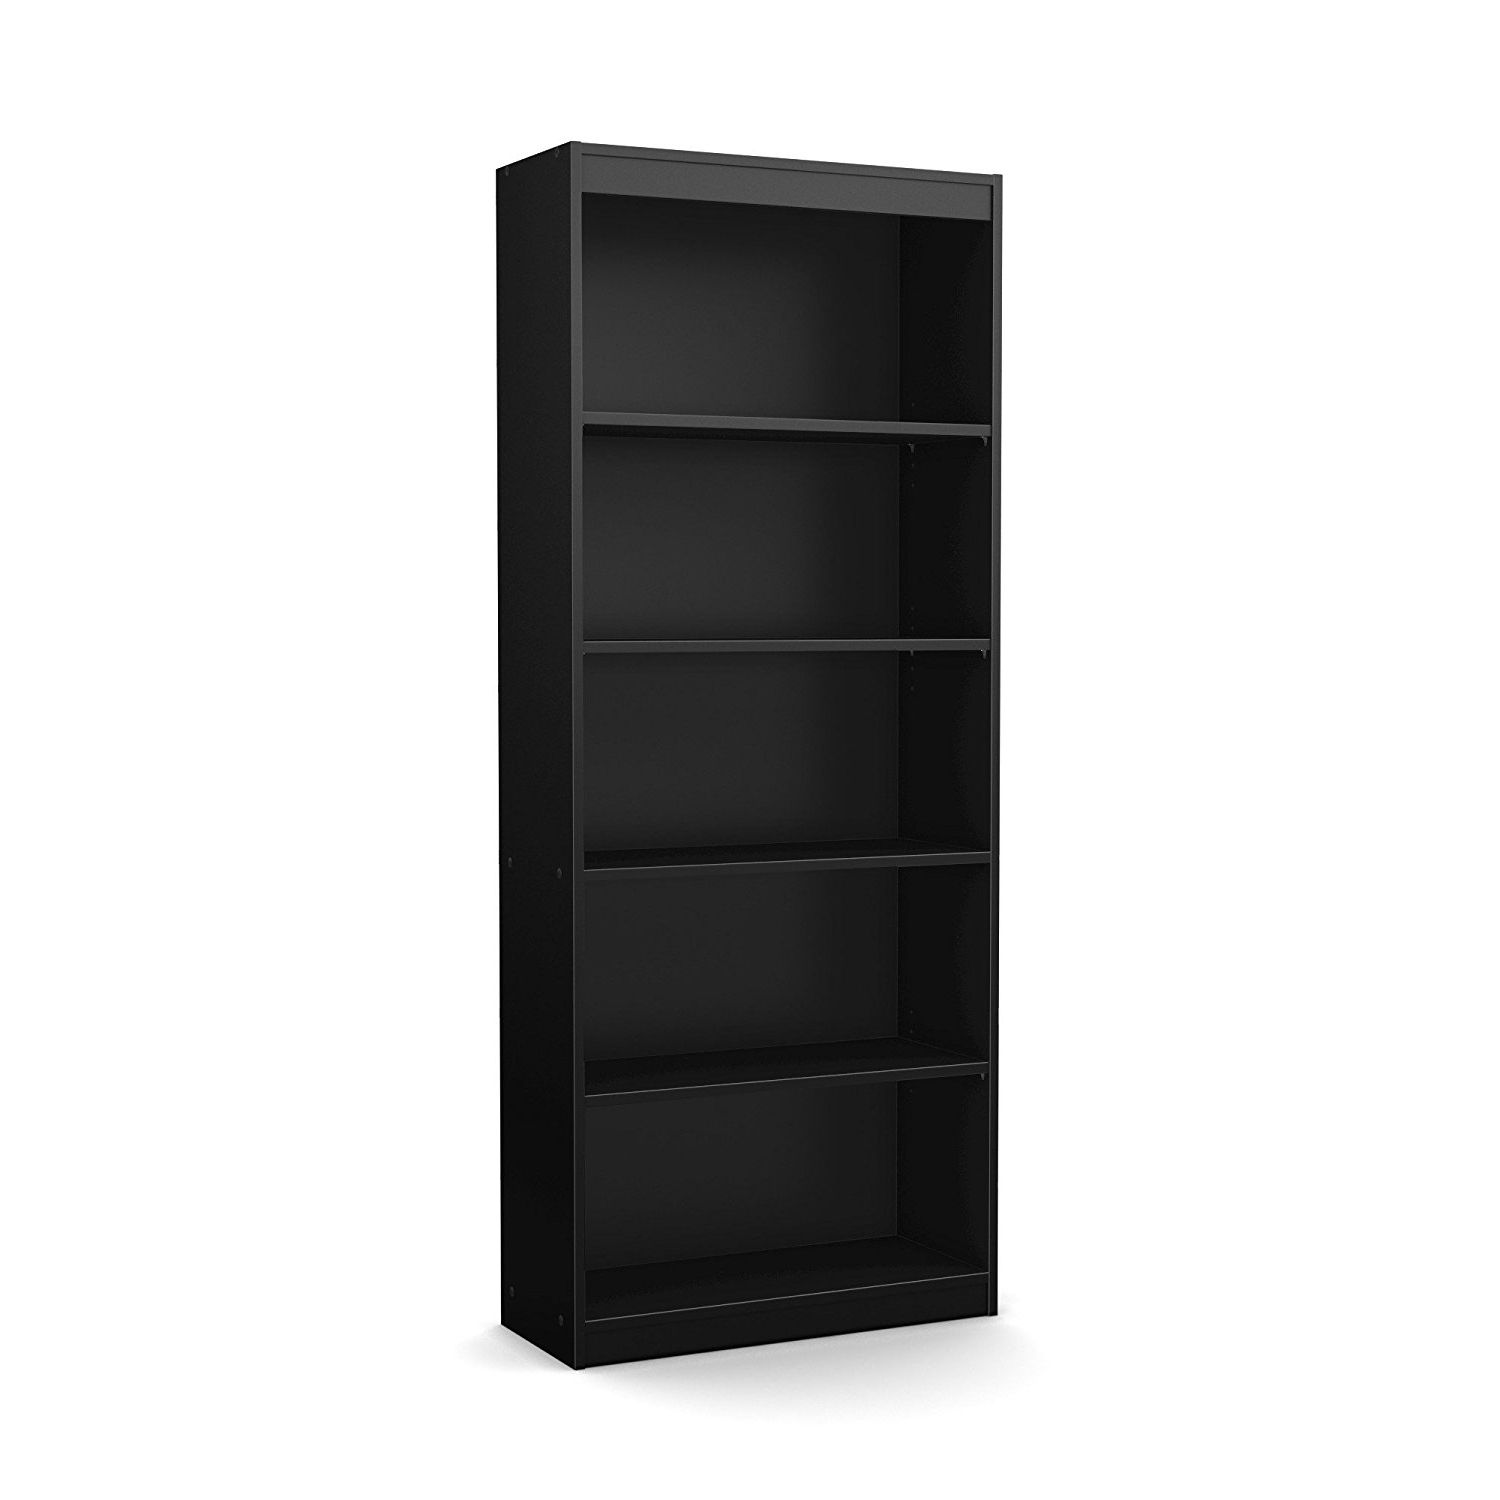 Amazon: South Shore Axess Collection 5 Shelf Bookcase, Black Pertaining To Well Known South Shore Axess Collection 5 Shelf Bookcases (View 7 of 15)